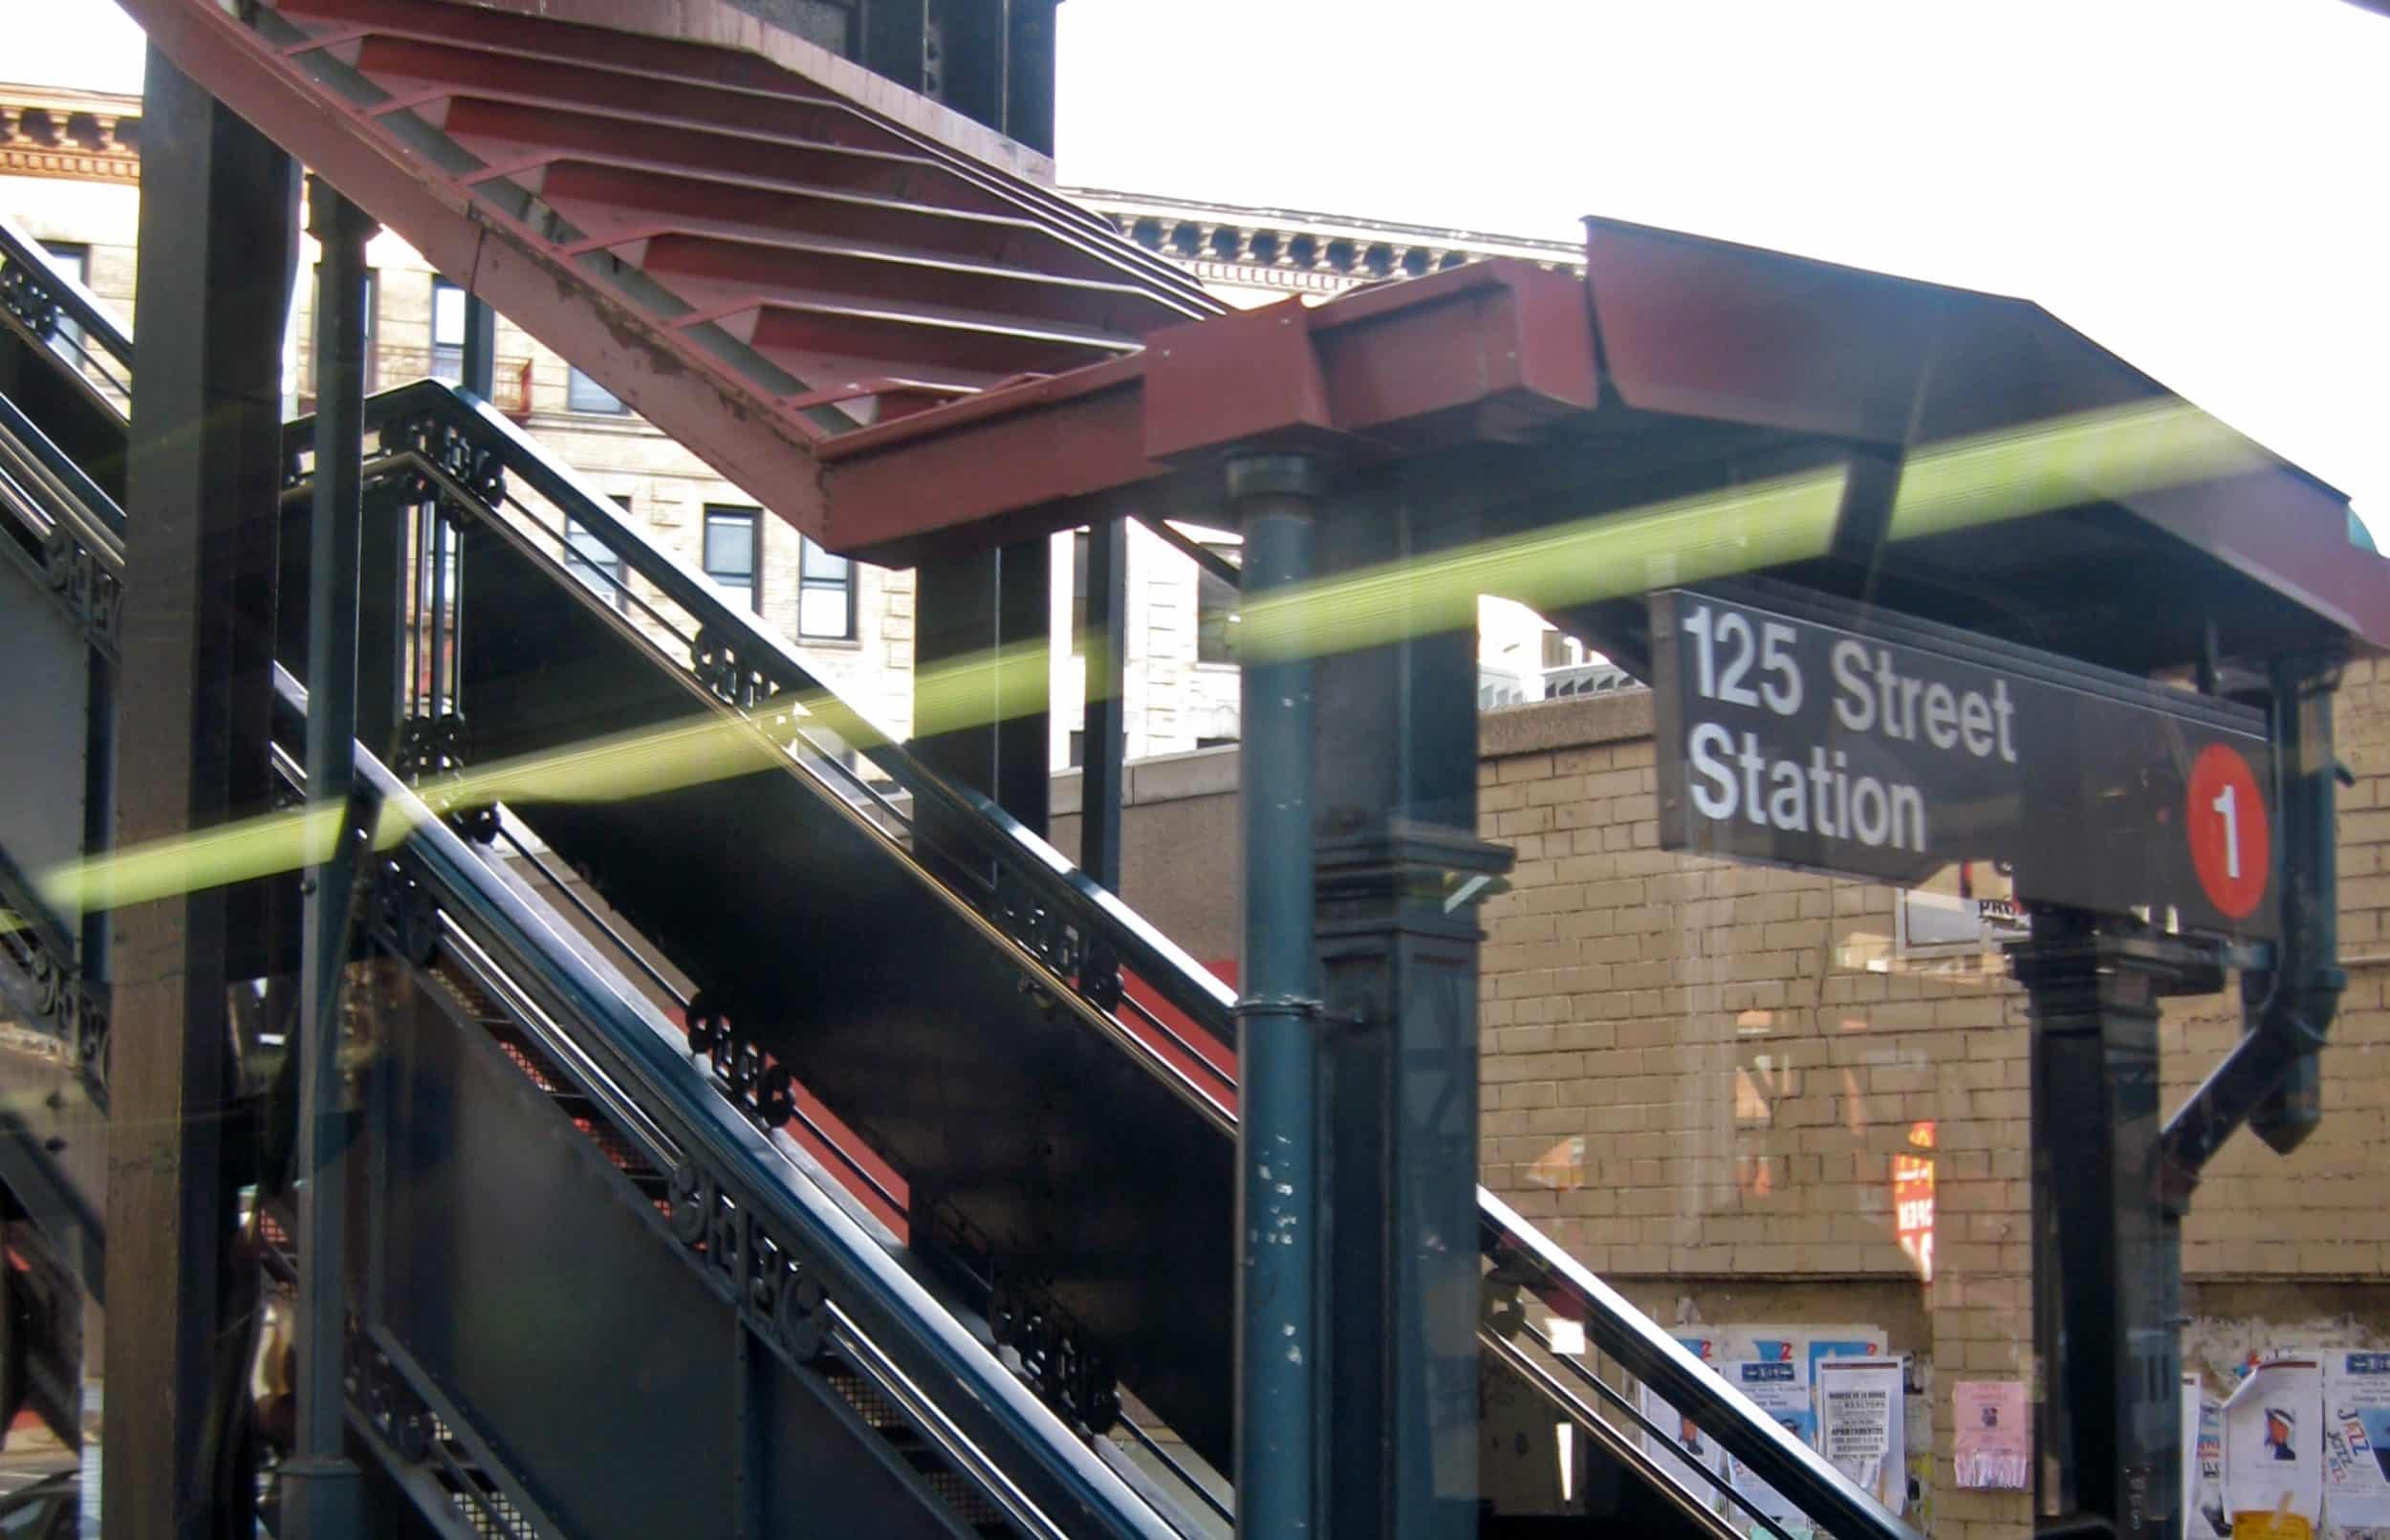 In a subway station in Manhattan unknown struck sleeping man with a knife in the leg